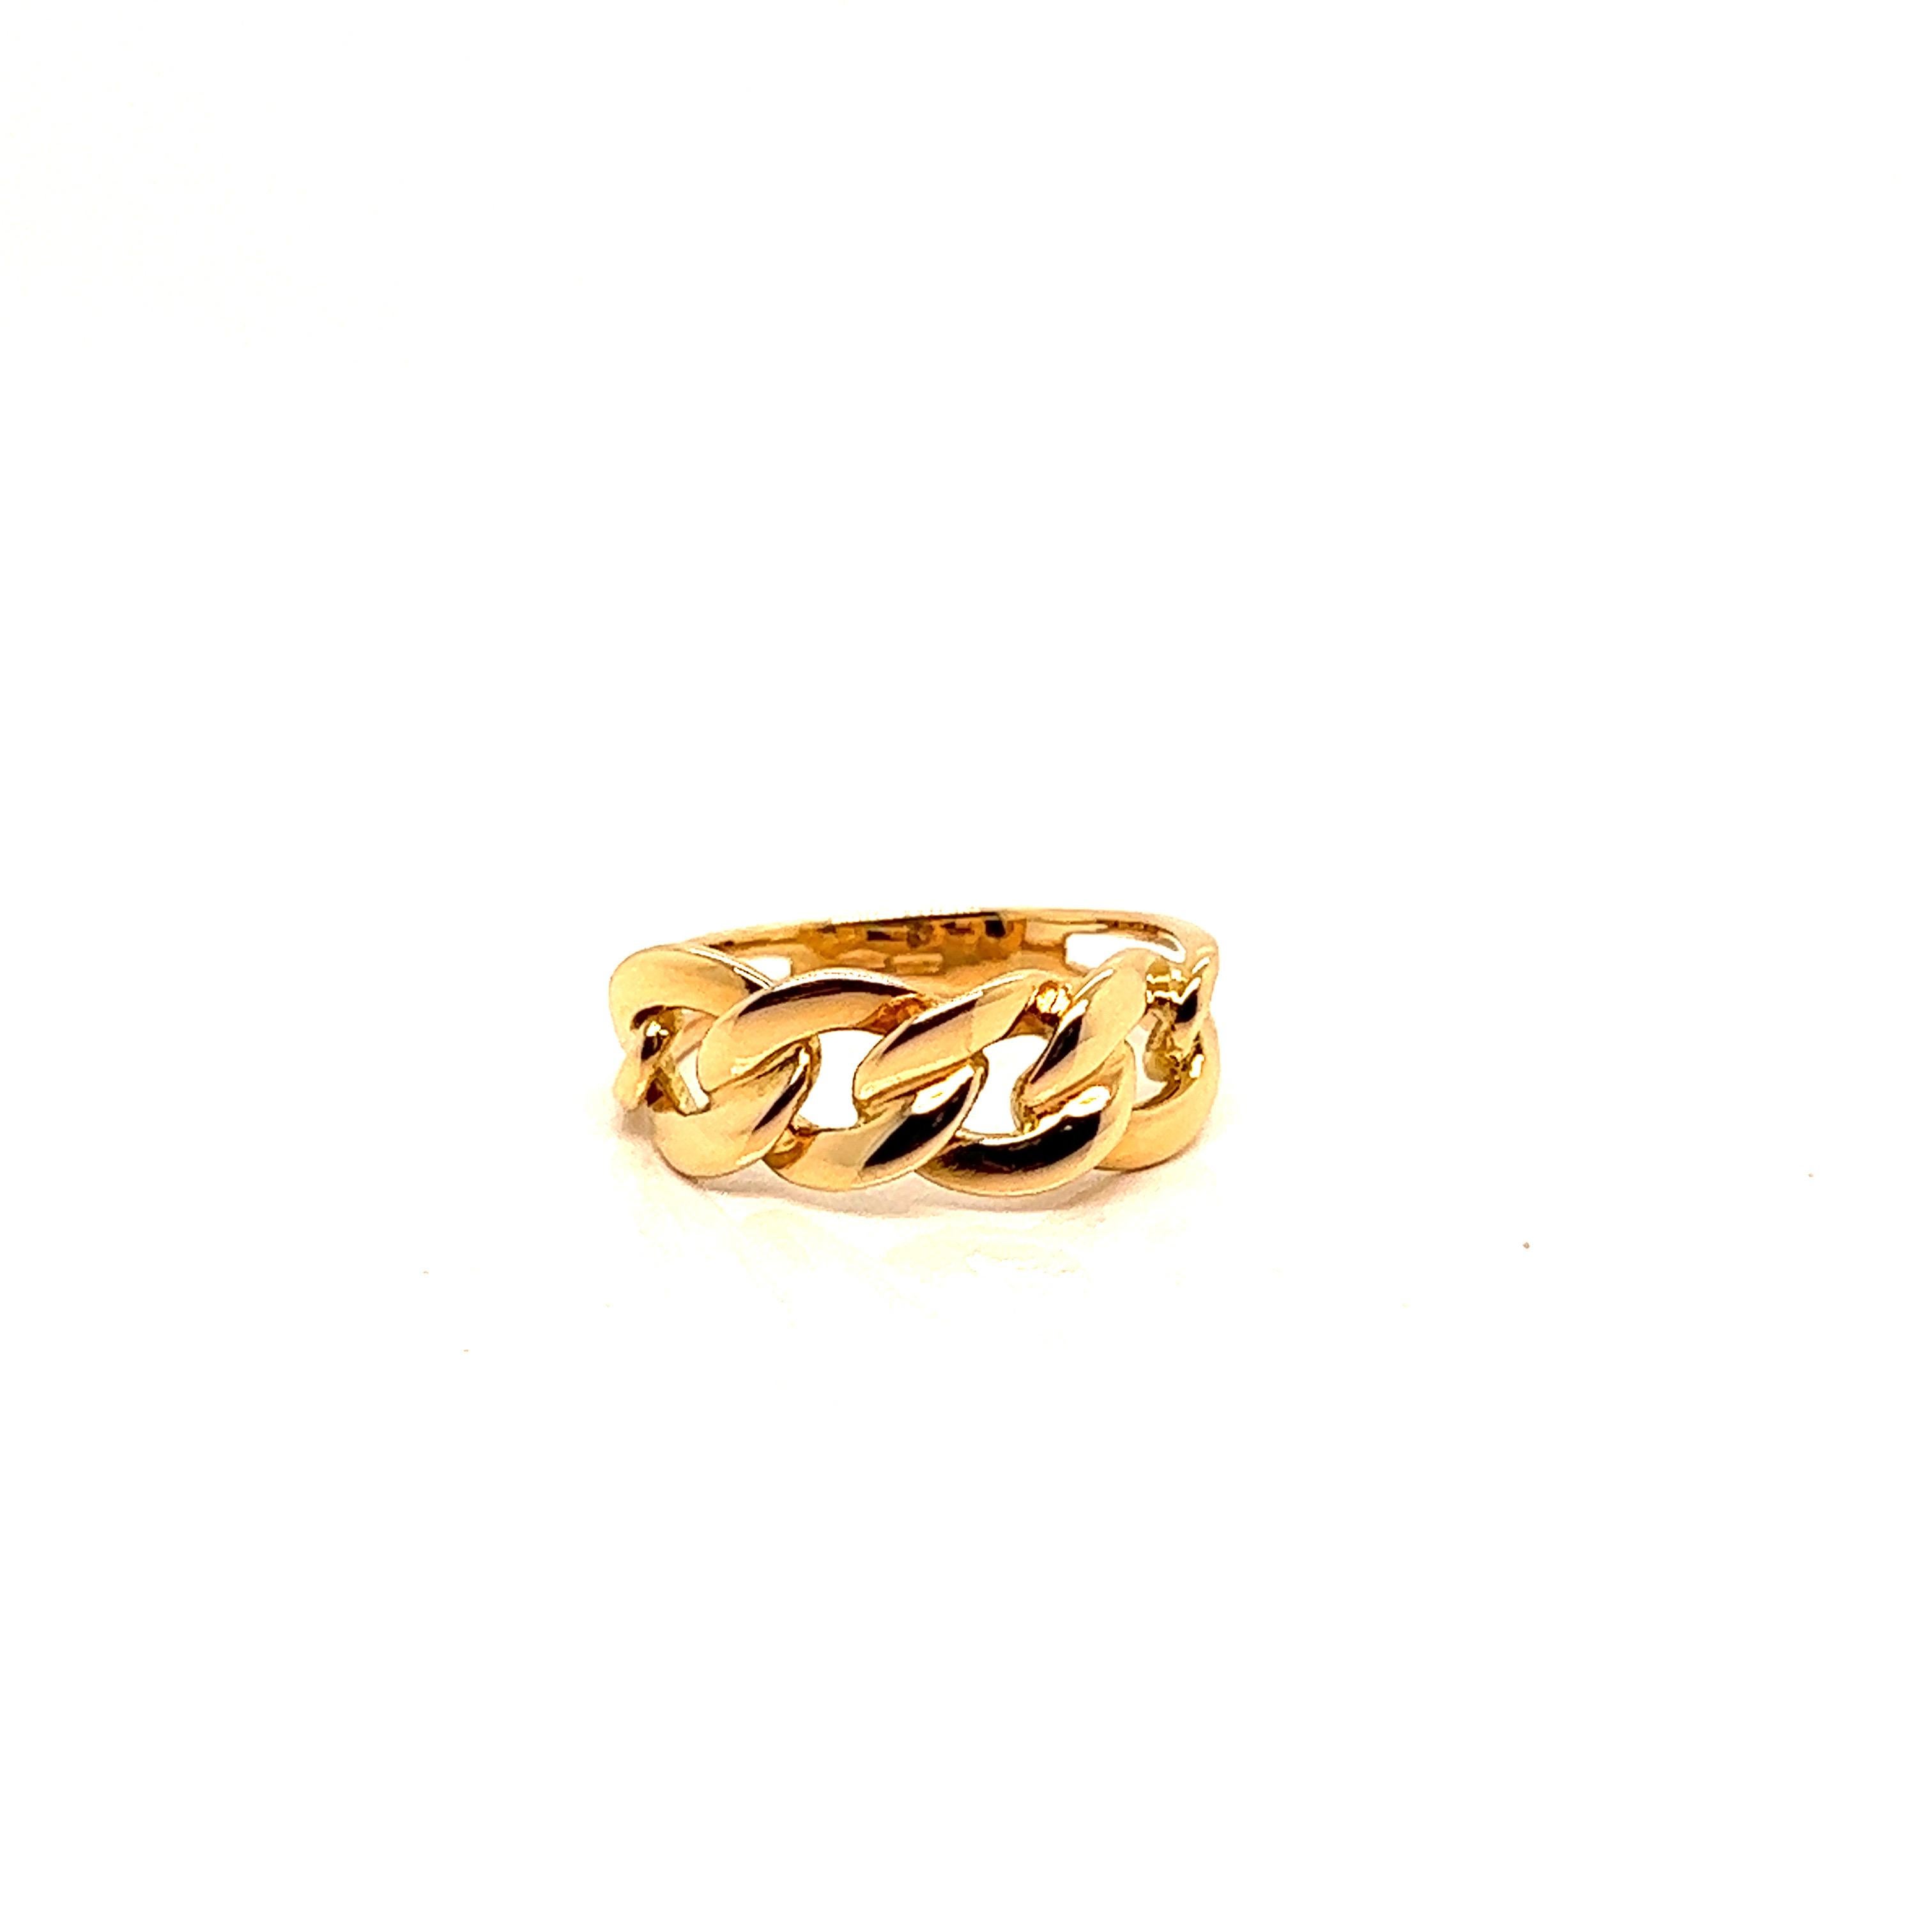 French Ring 4 Small Braided Rings Yellow Gold 18 Karat For Sale 3